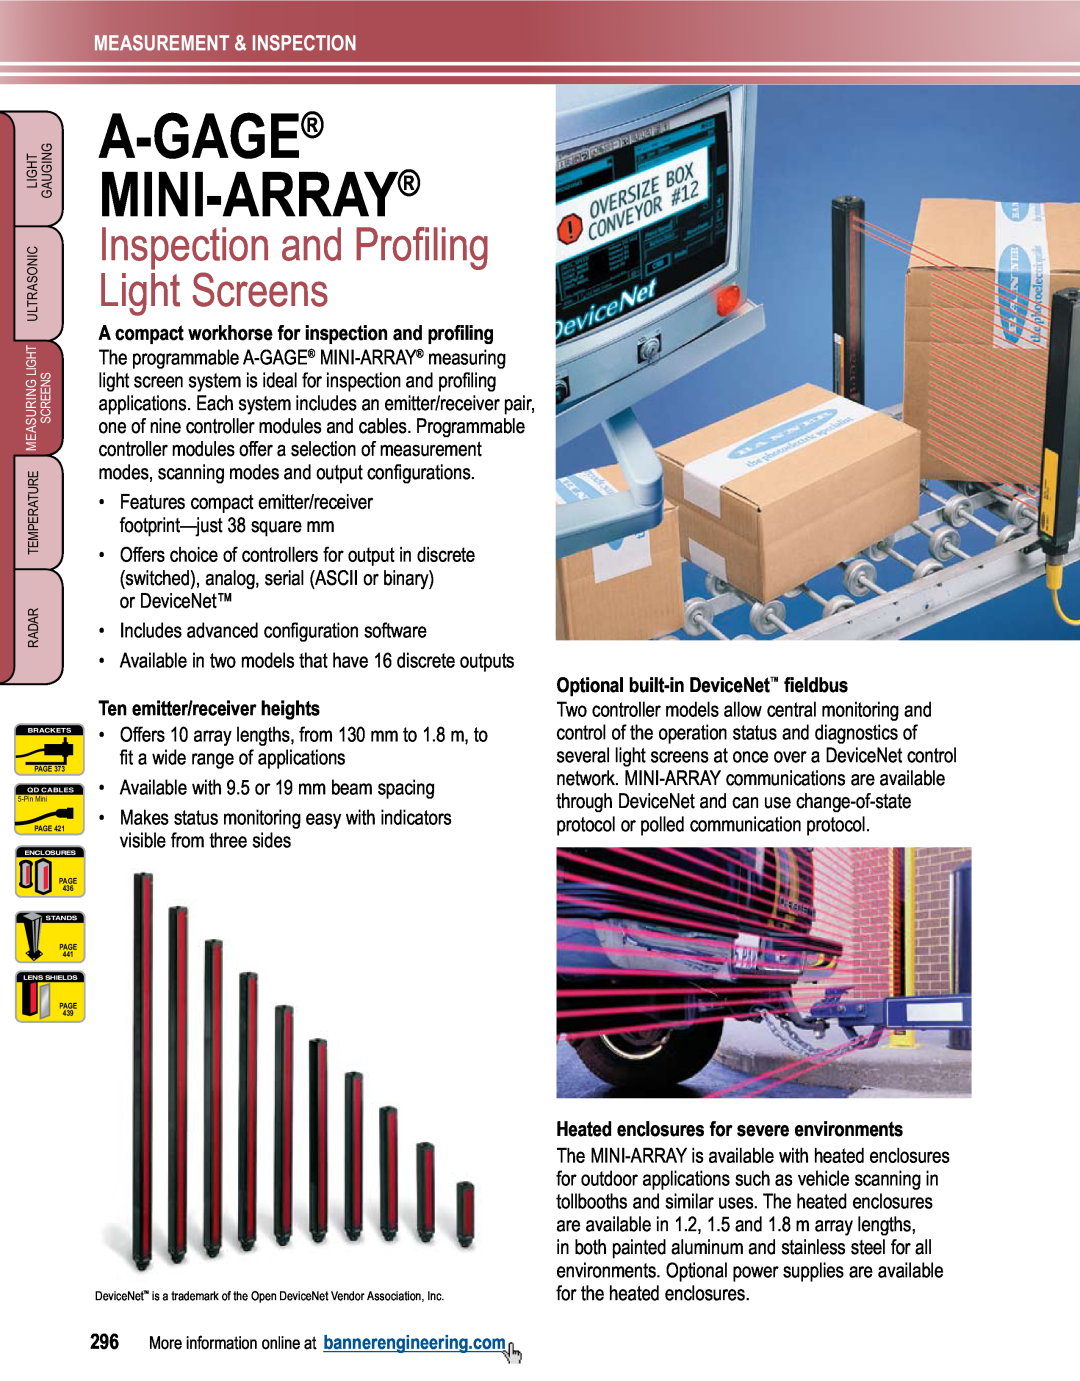 Banner L-GAGE manual A-Gage Mini-Array, Inspection and Profiling Light Screens, Measurement & Inspection 